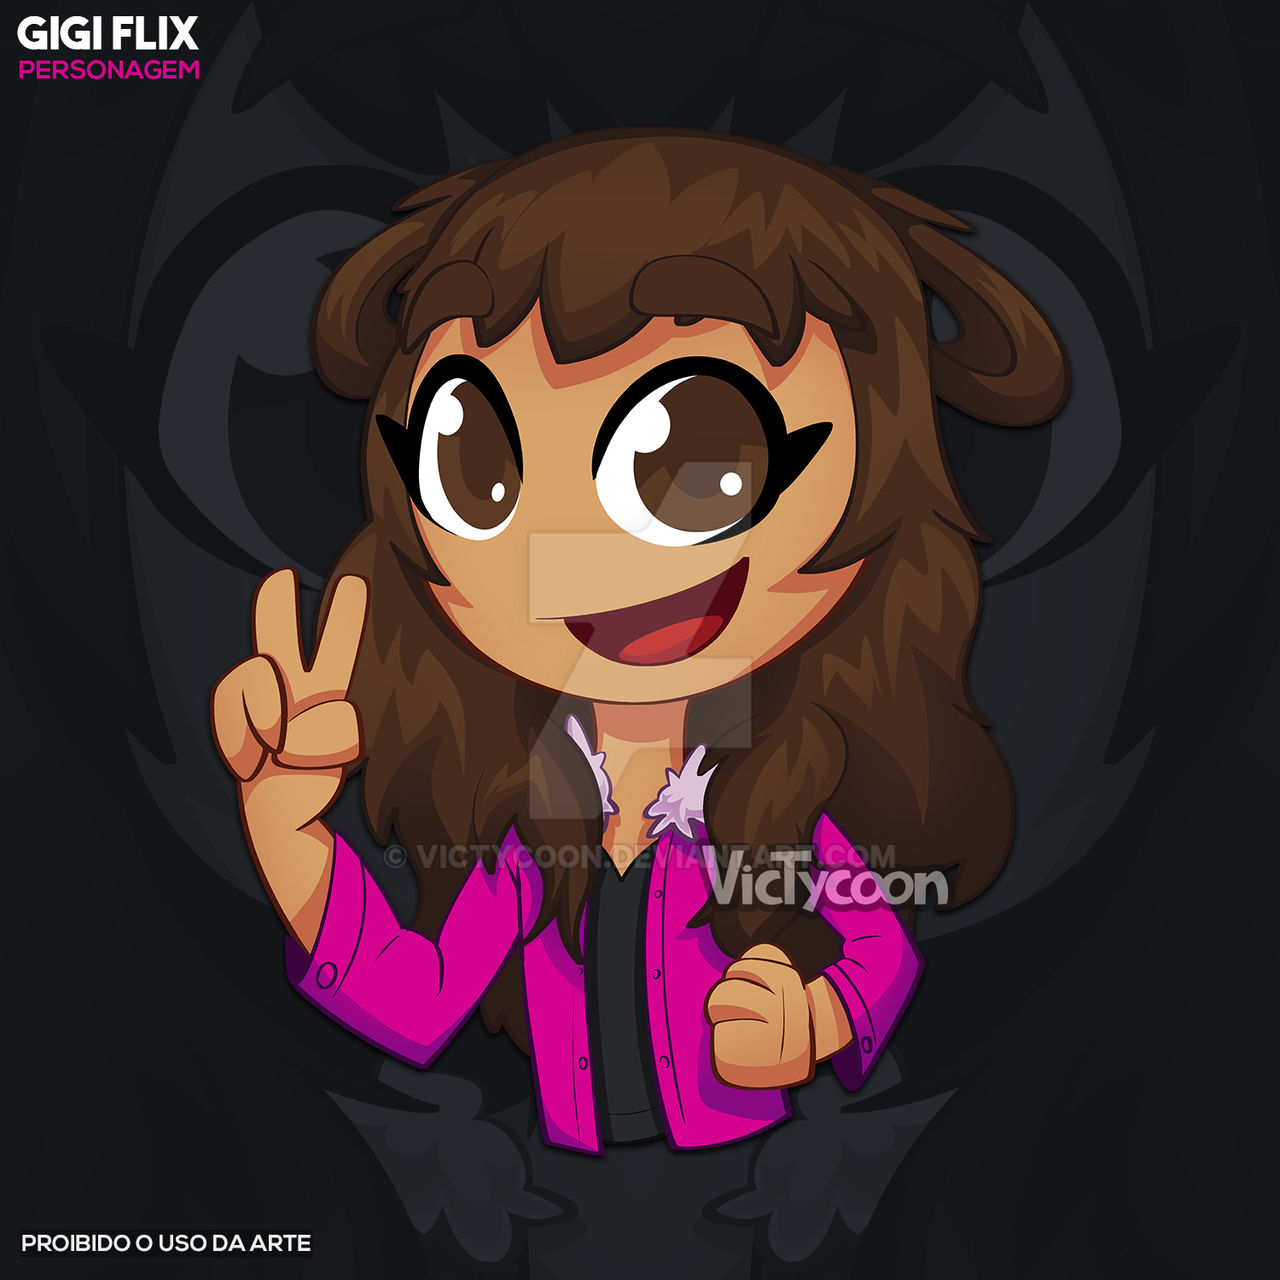 LOGOTIPO - Lilly Blox (Canal Infantil Roblox) by VicTycoon on DeviantArt